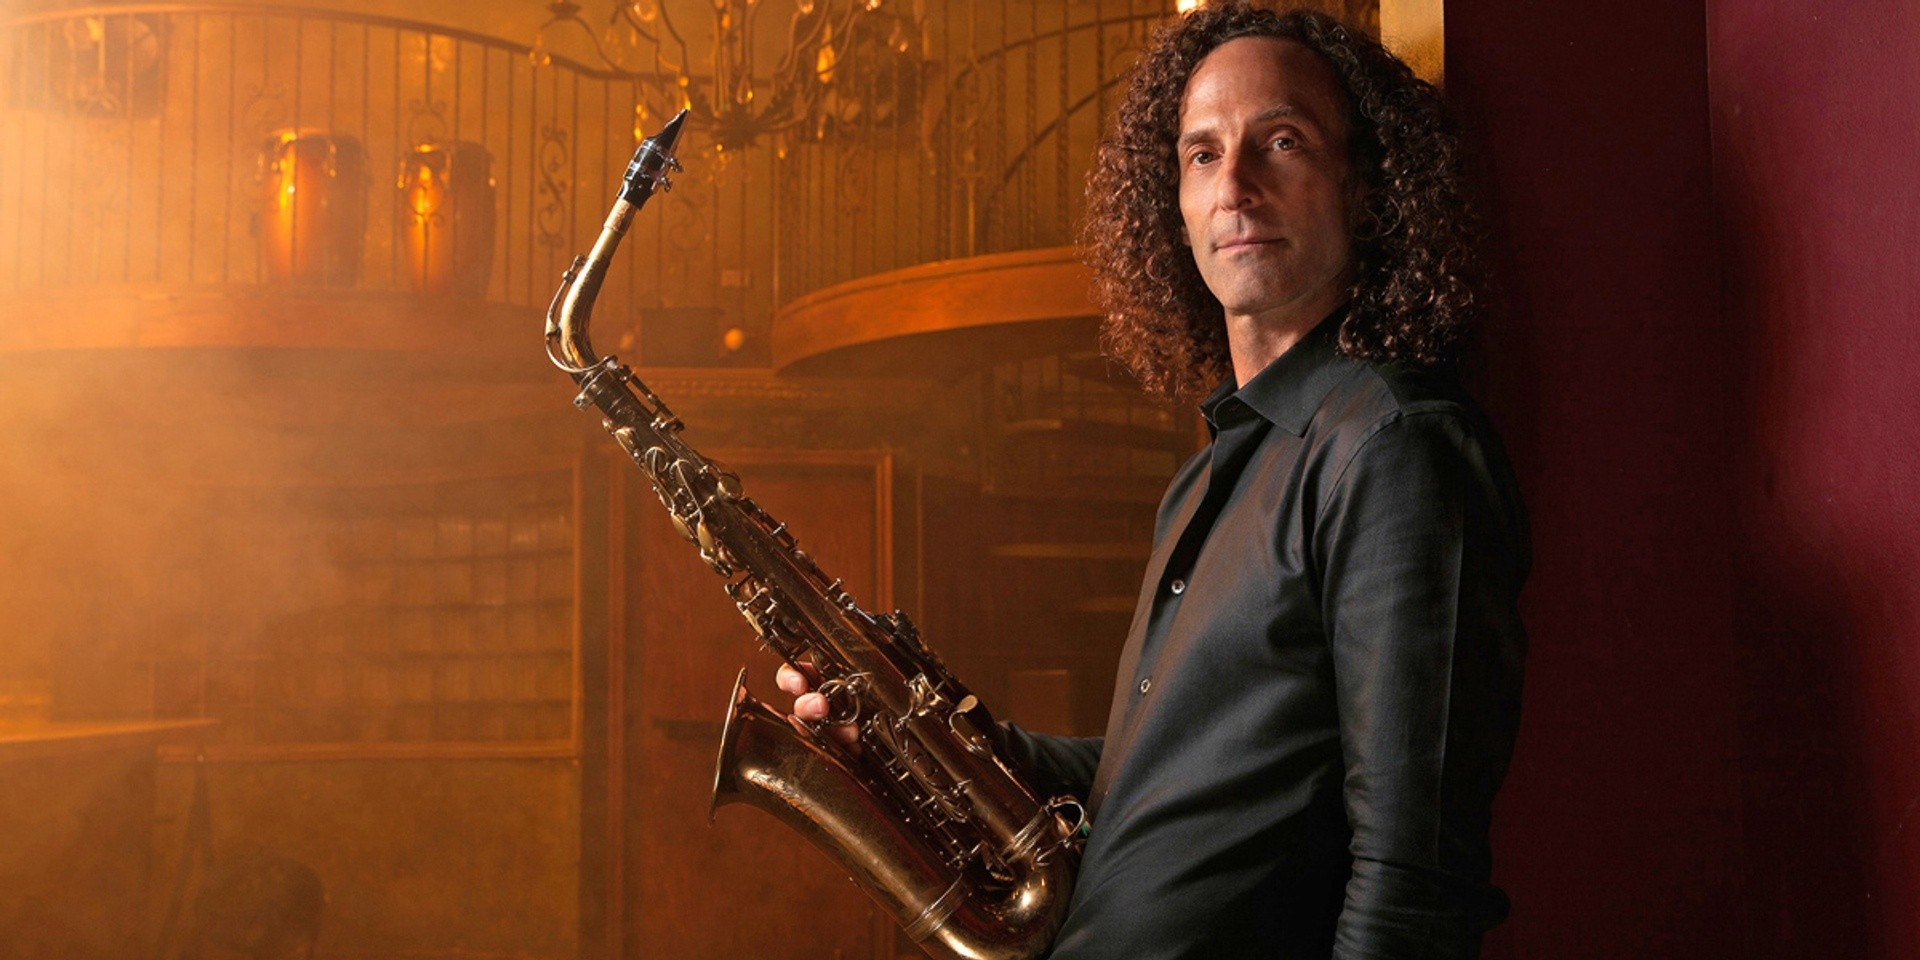 Kenny G to perform in Singapore in February 